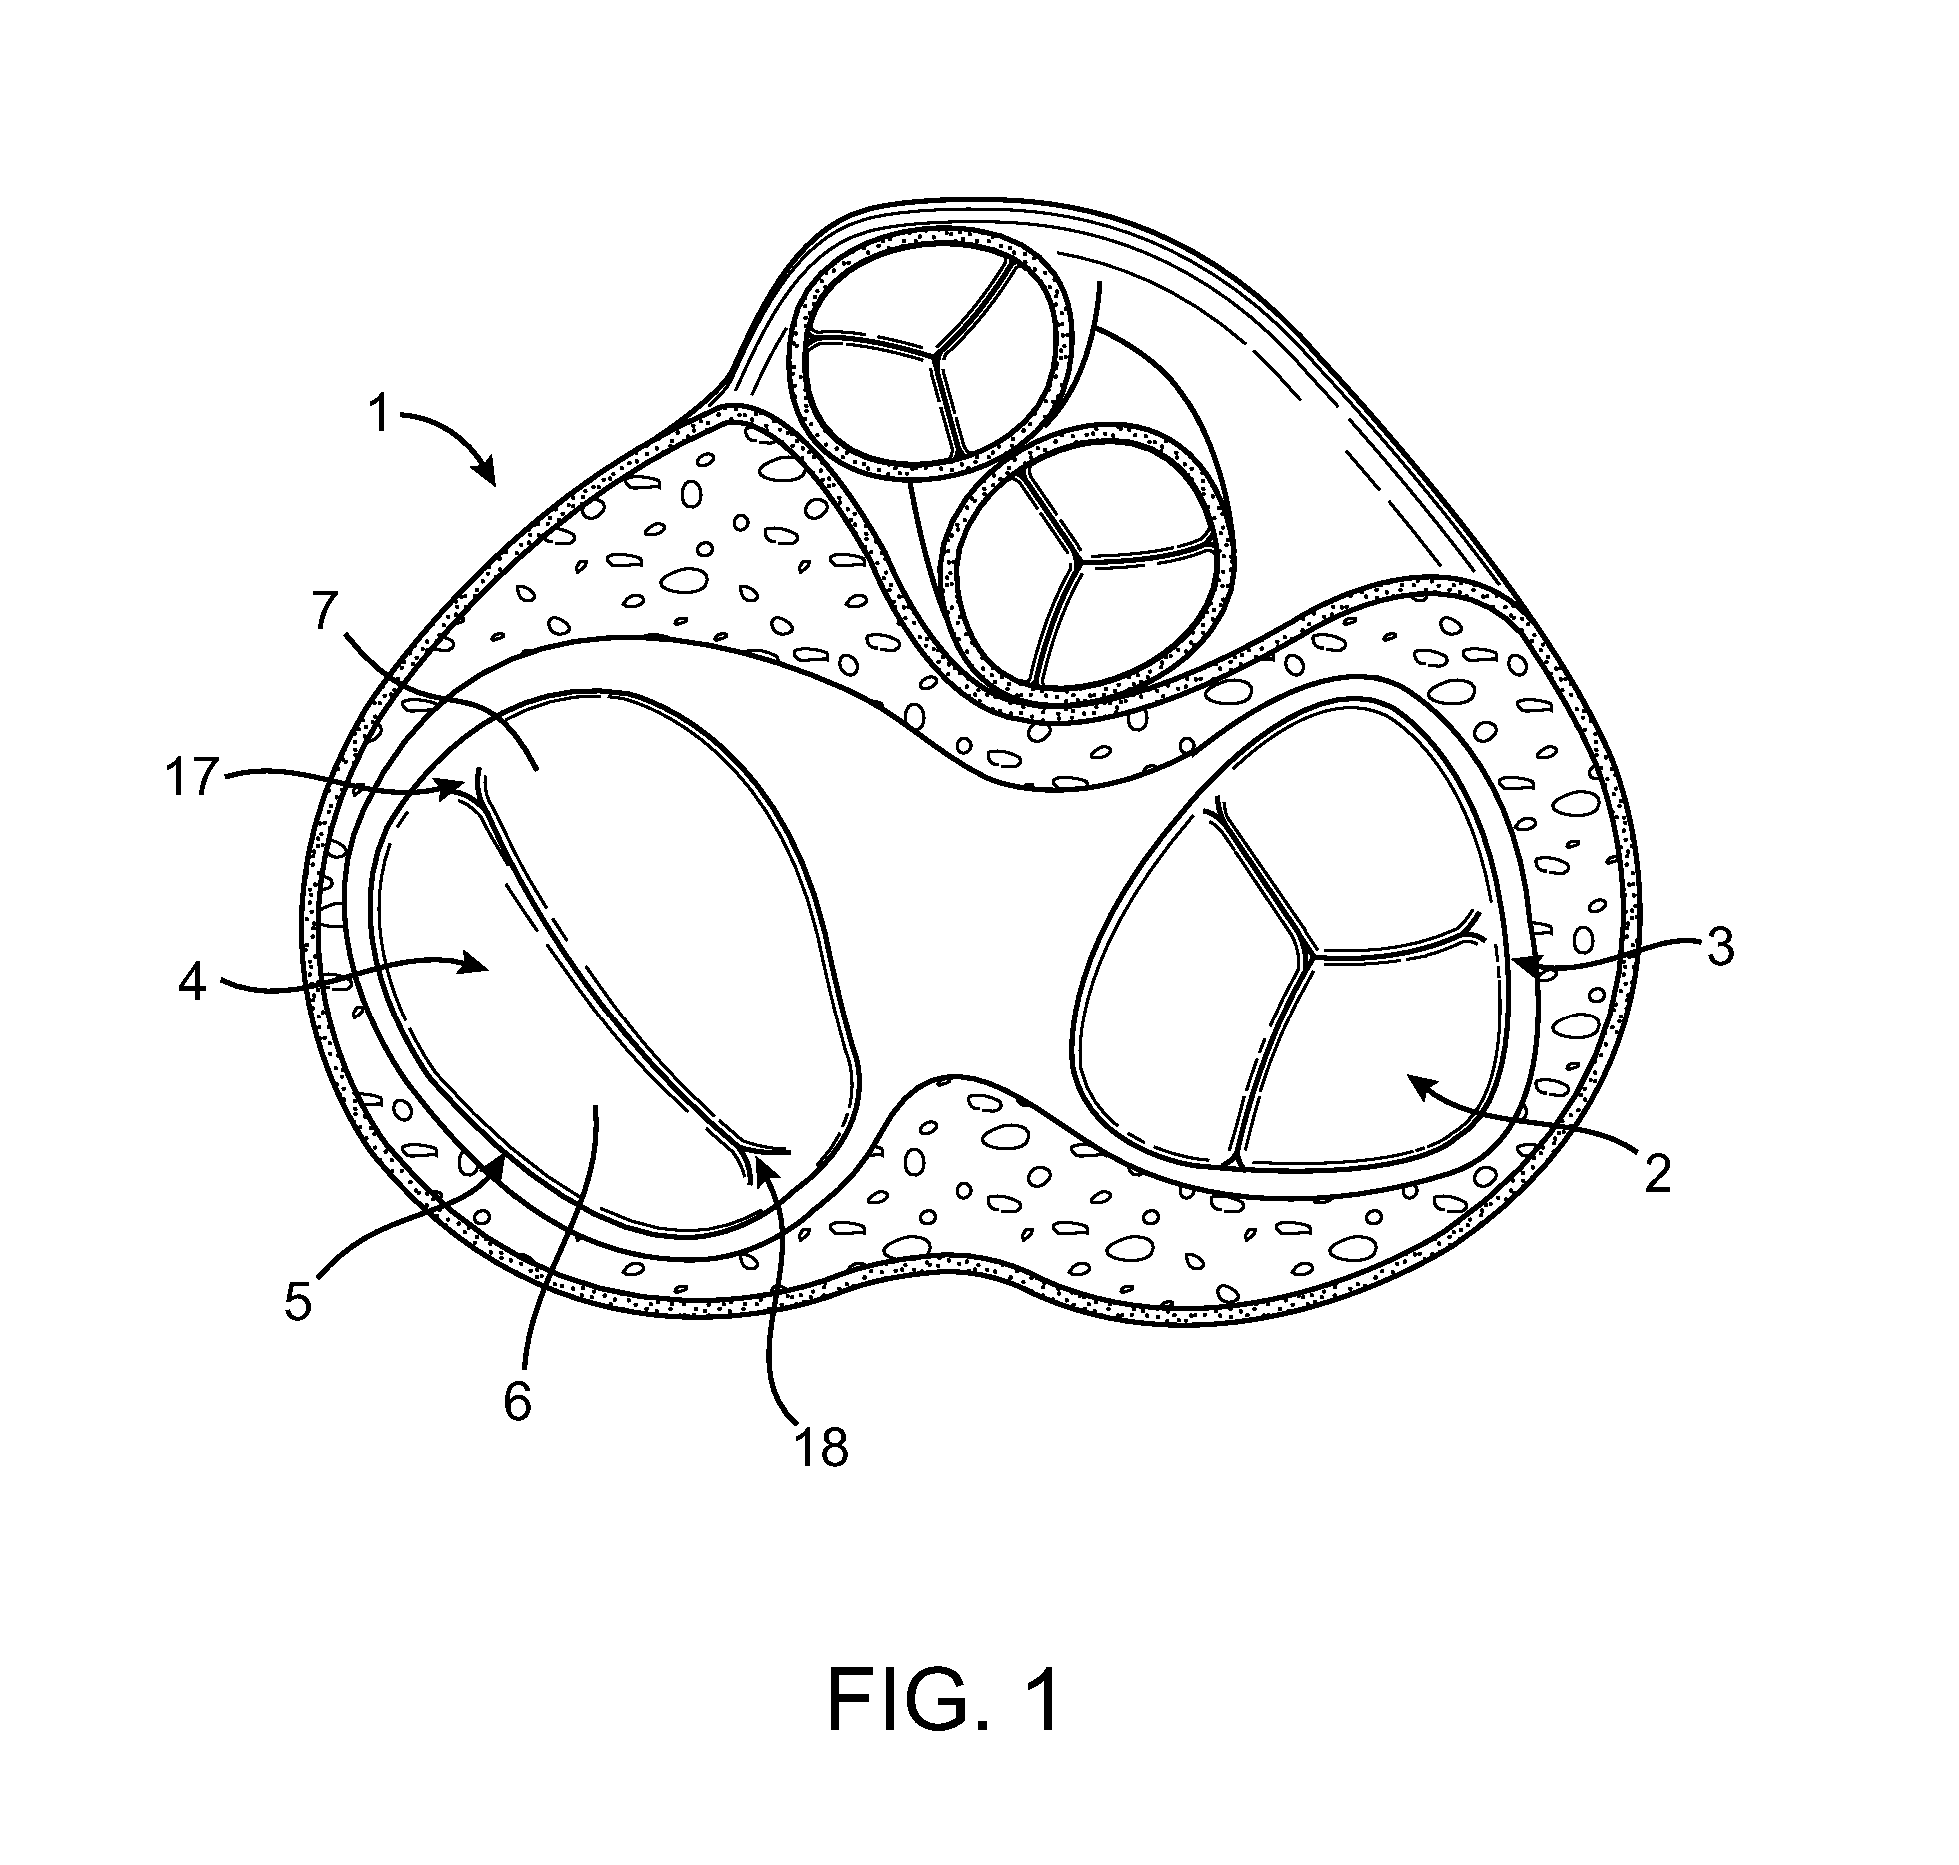 Annuloplasty Device Having a Helical Anchor and Methods for its Use